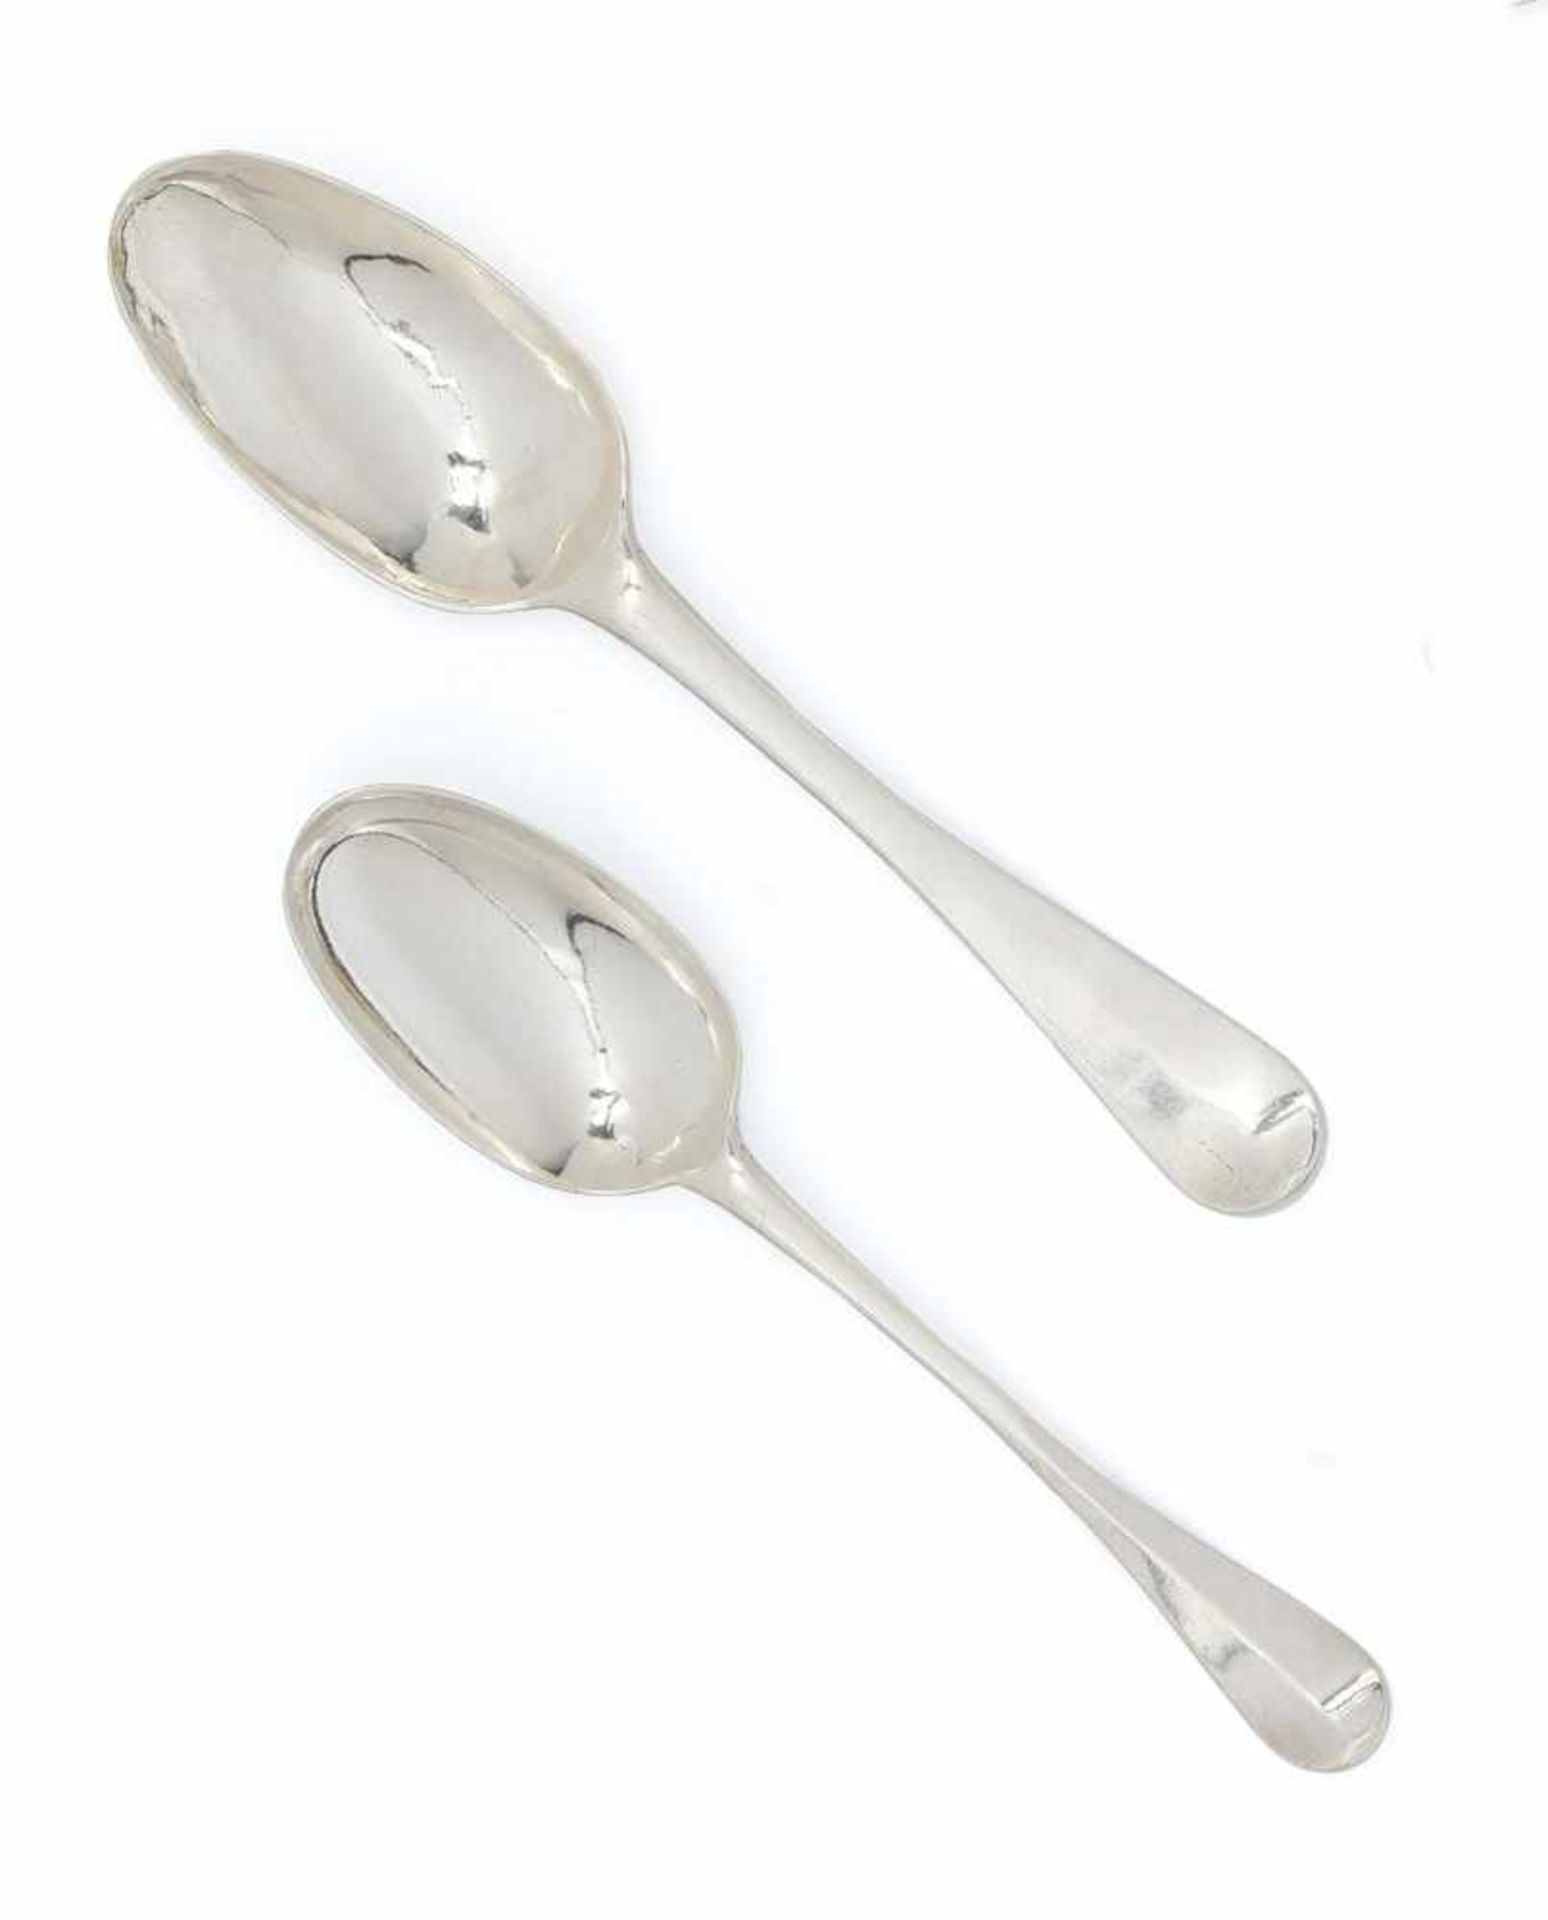 TWO LARGE SILVER GEORGE II SPOONS.